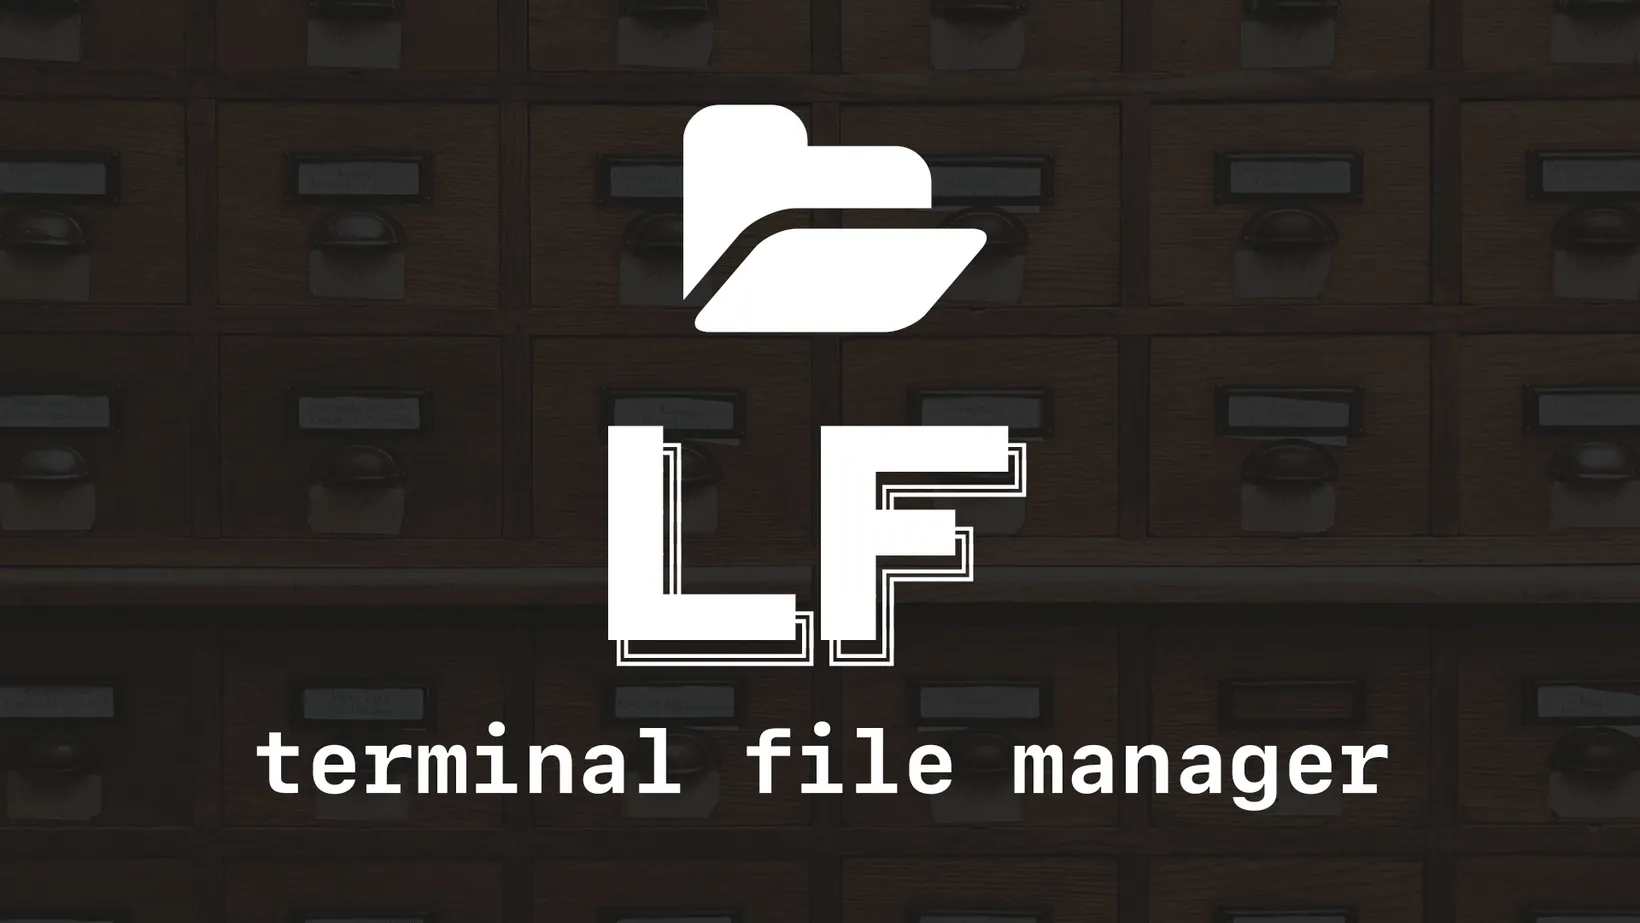 Manage Files with lf hero